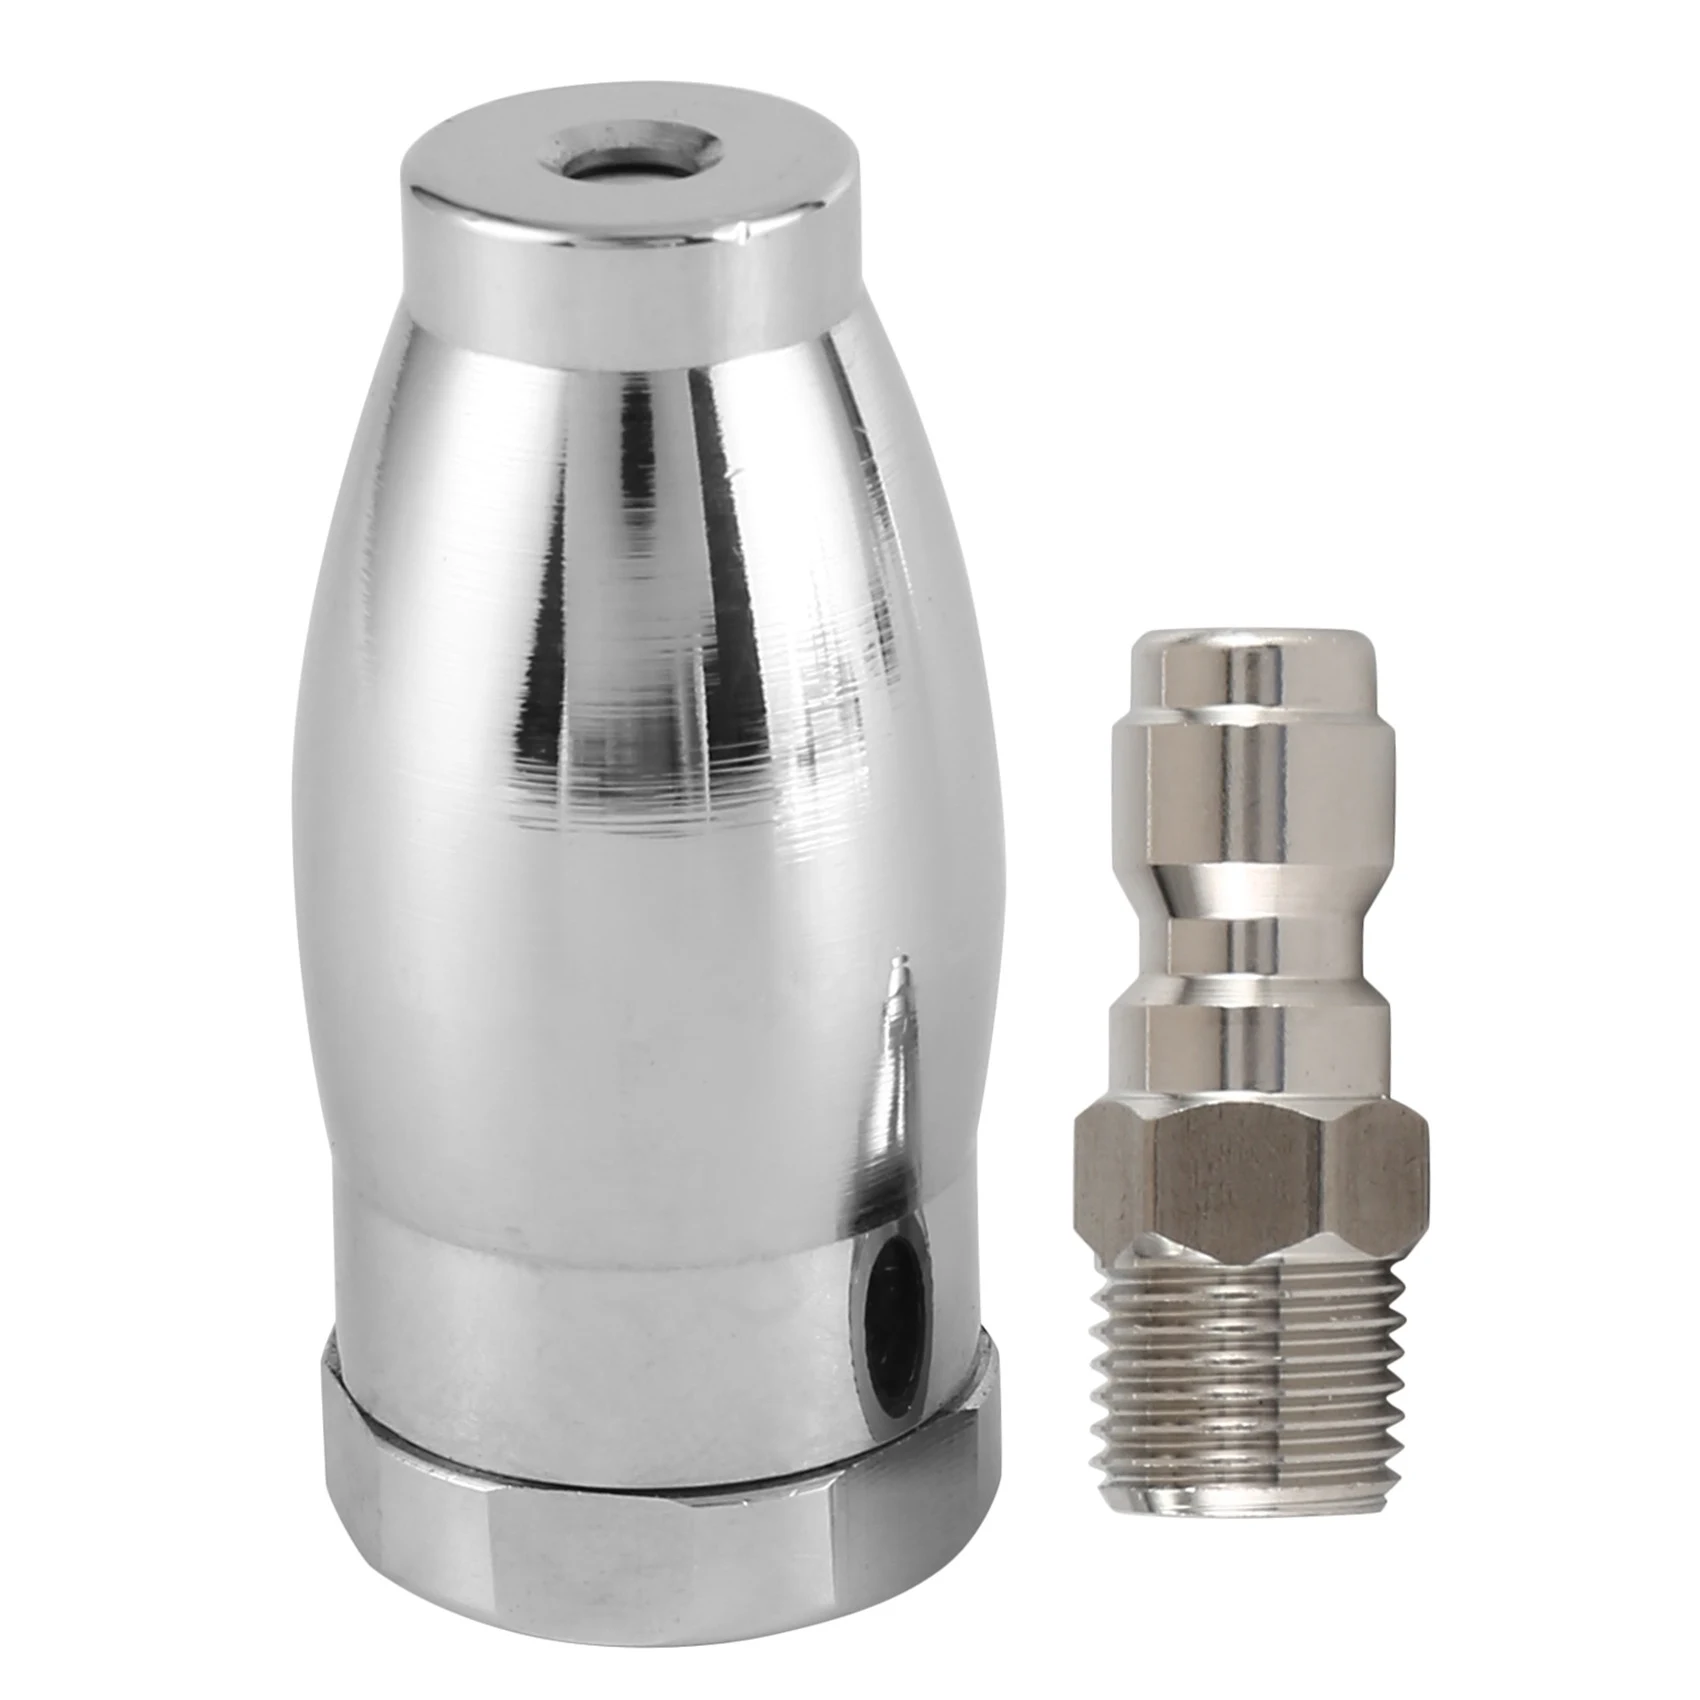 

Pressure Washer Turbo Nozzle Stainless Steel Rotating Spray Nozzle with 1/4 Inch Quick-Connect 3.0 GPM 3600 PSI